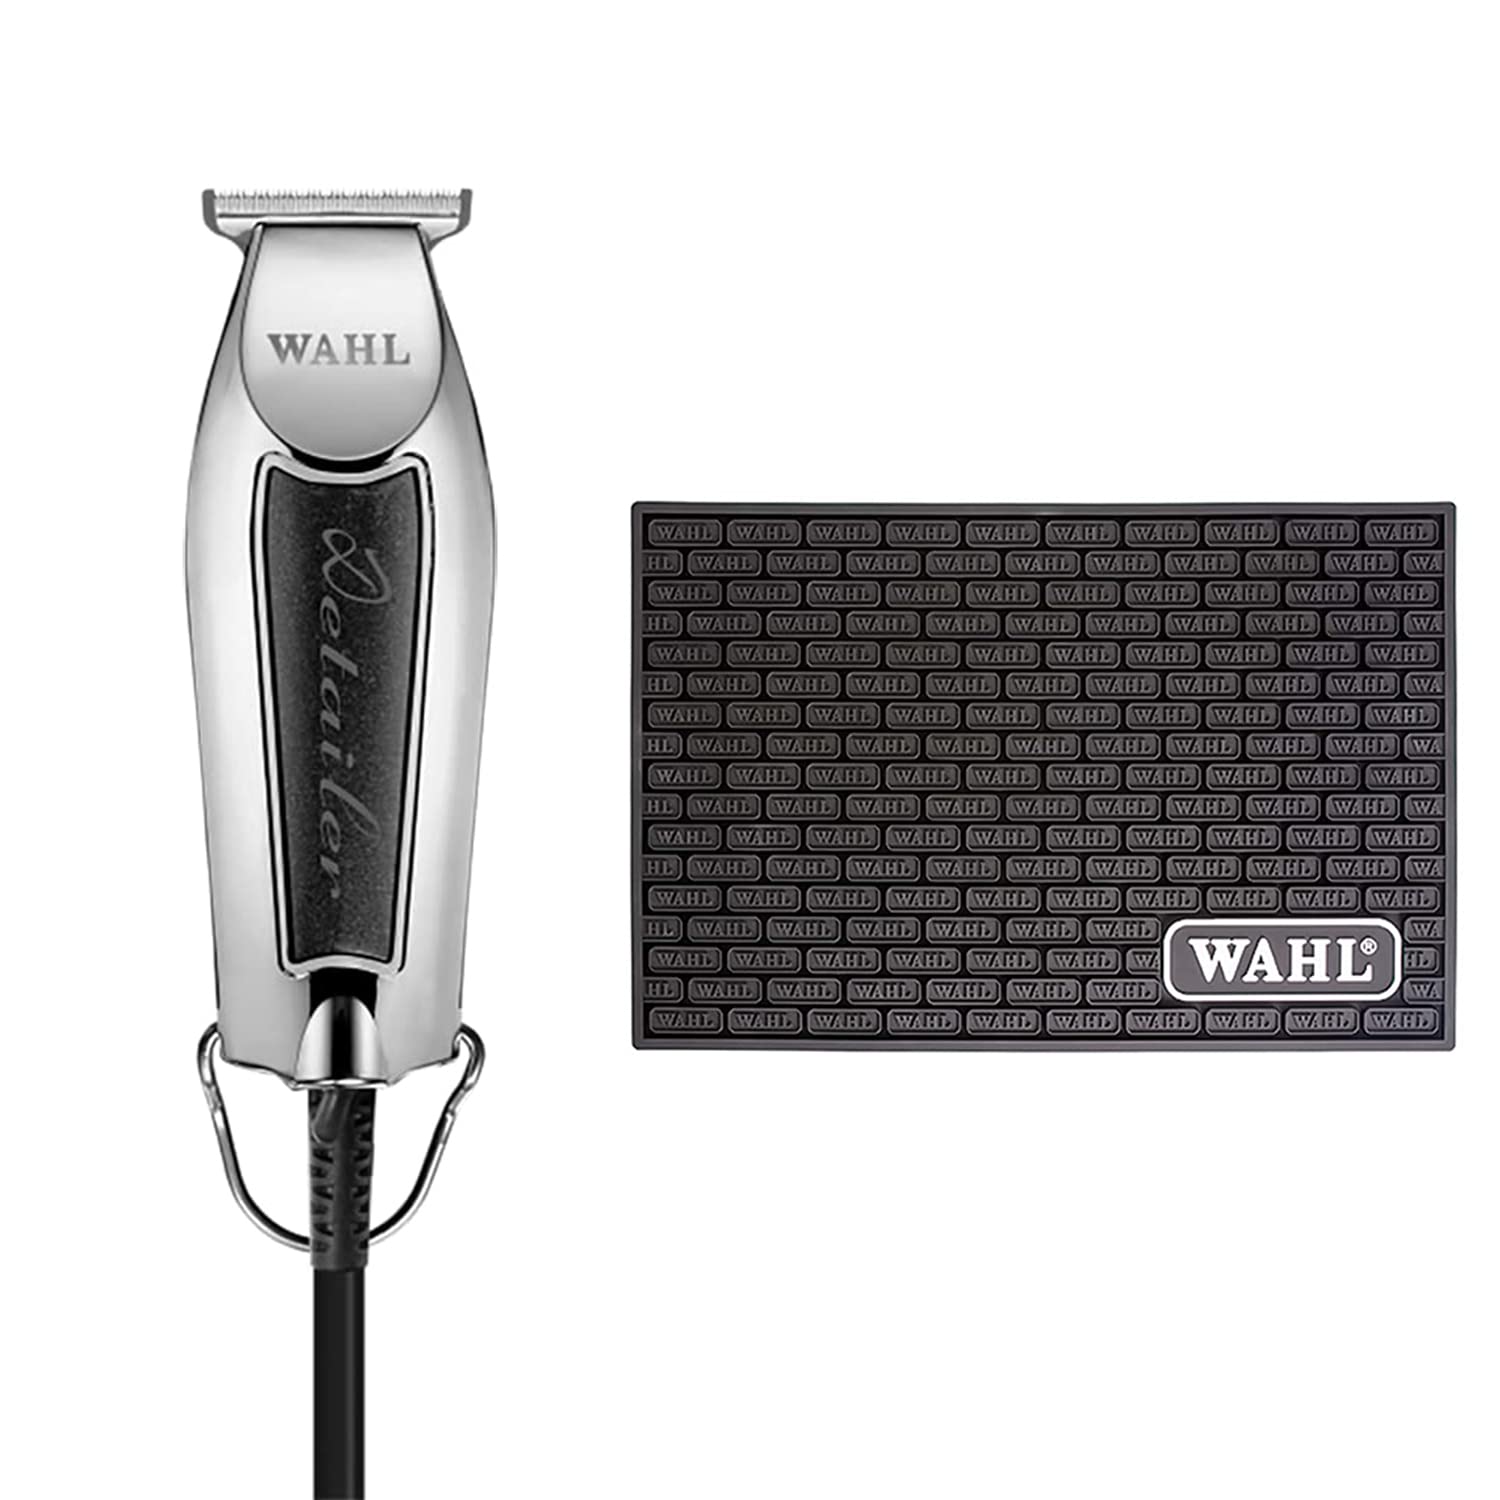 Wahl Professional Detailer Trimmer & Wahl Professional Tool Mat for Clippers, Trimmers & Haircut Tools Bundle